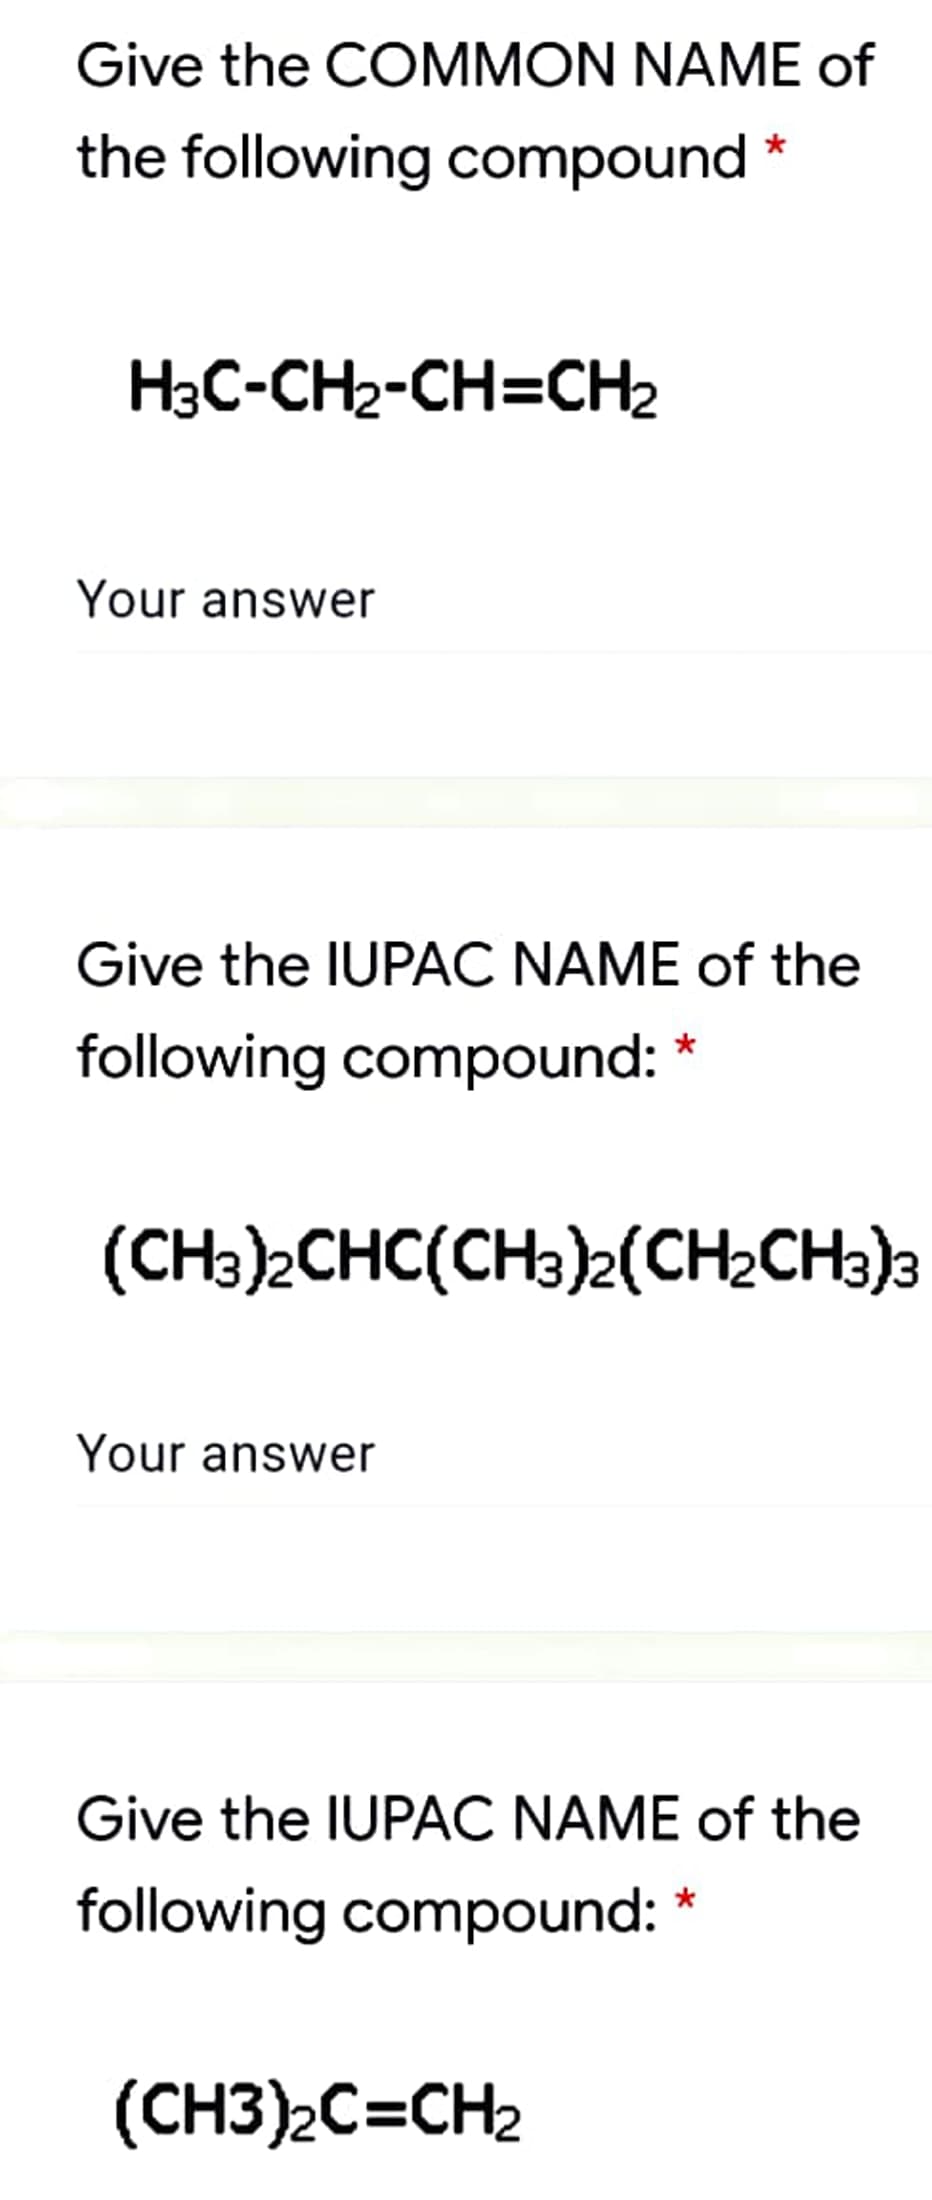 Give the COMMON NAME of
the following compound *
H3C-CH2-CH=CH2
Your answer
Give the IUPAC NAME of the
following compound: *
(CH3)2CHC(CH3)2(CH2CH3)a
Your answer
Give the IUPAC NAME of the
following compound: *
(CH3)2C=CH2
